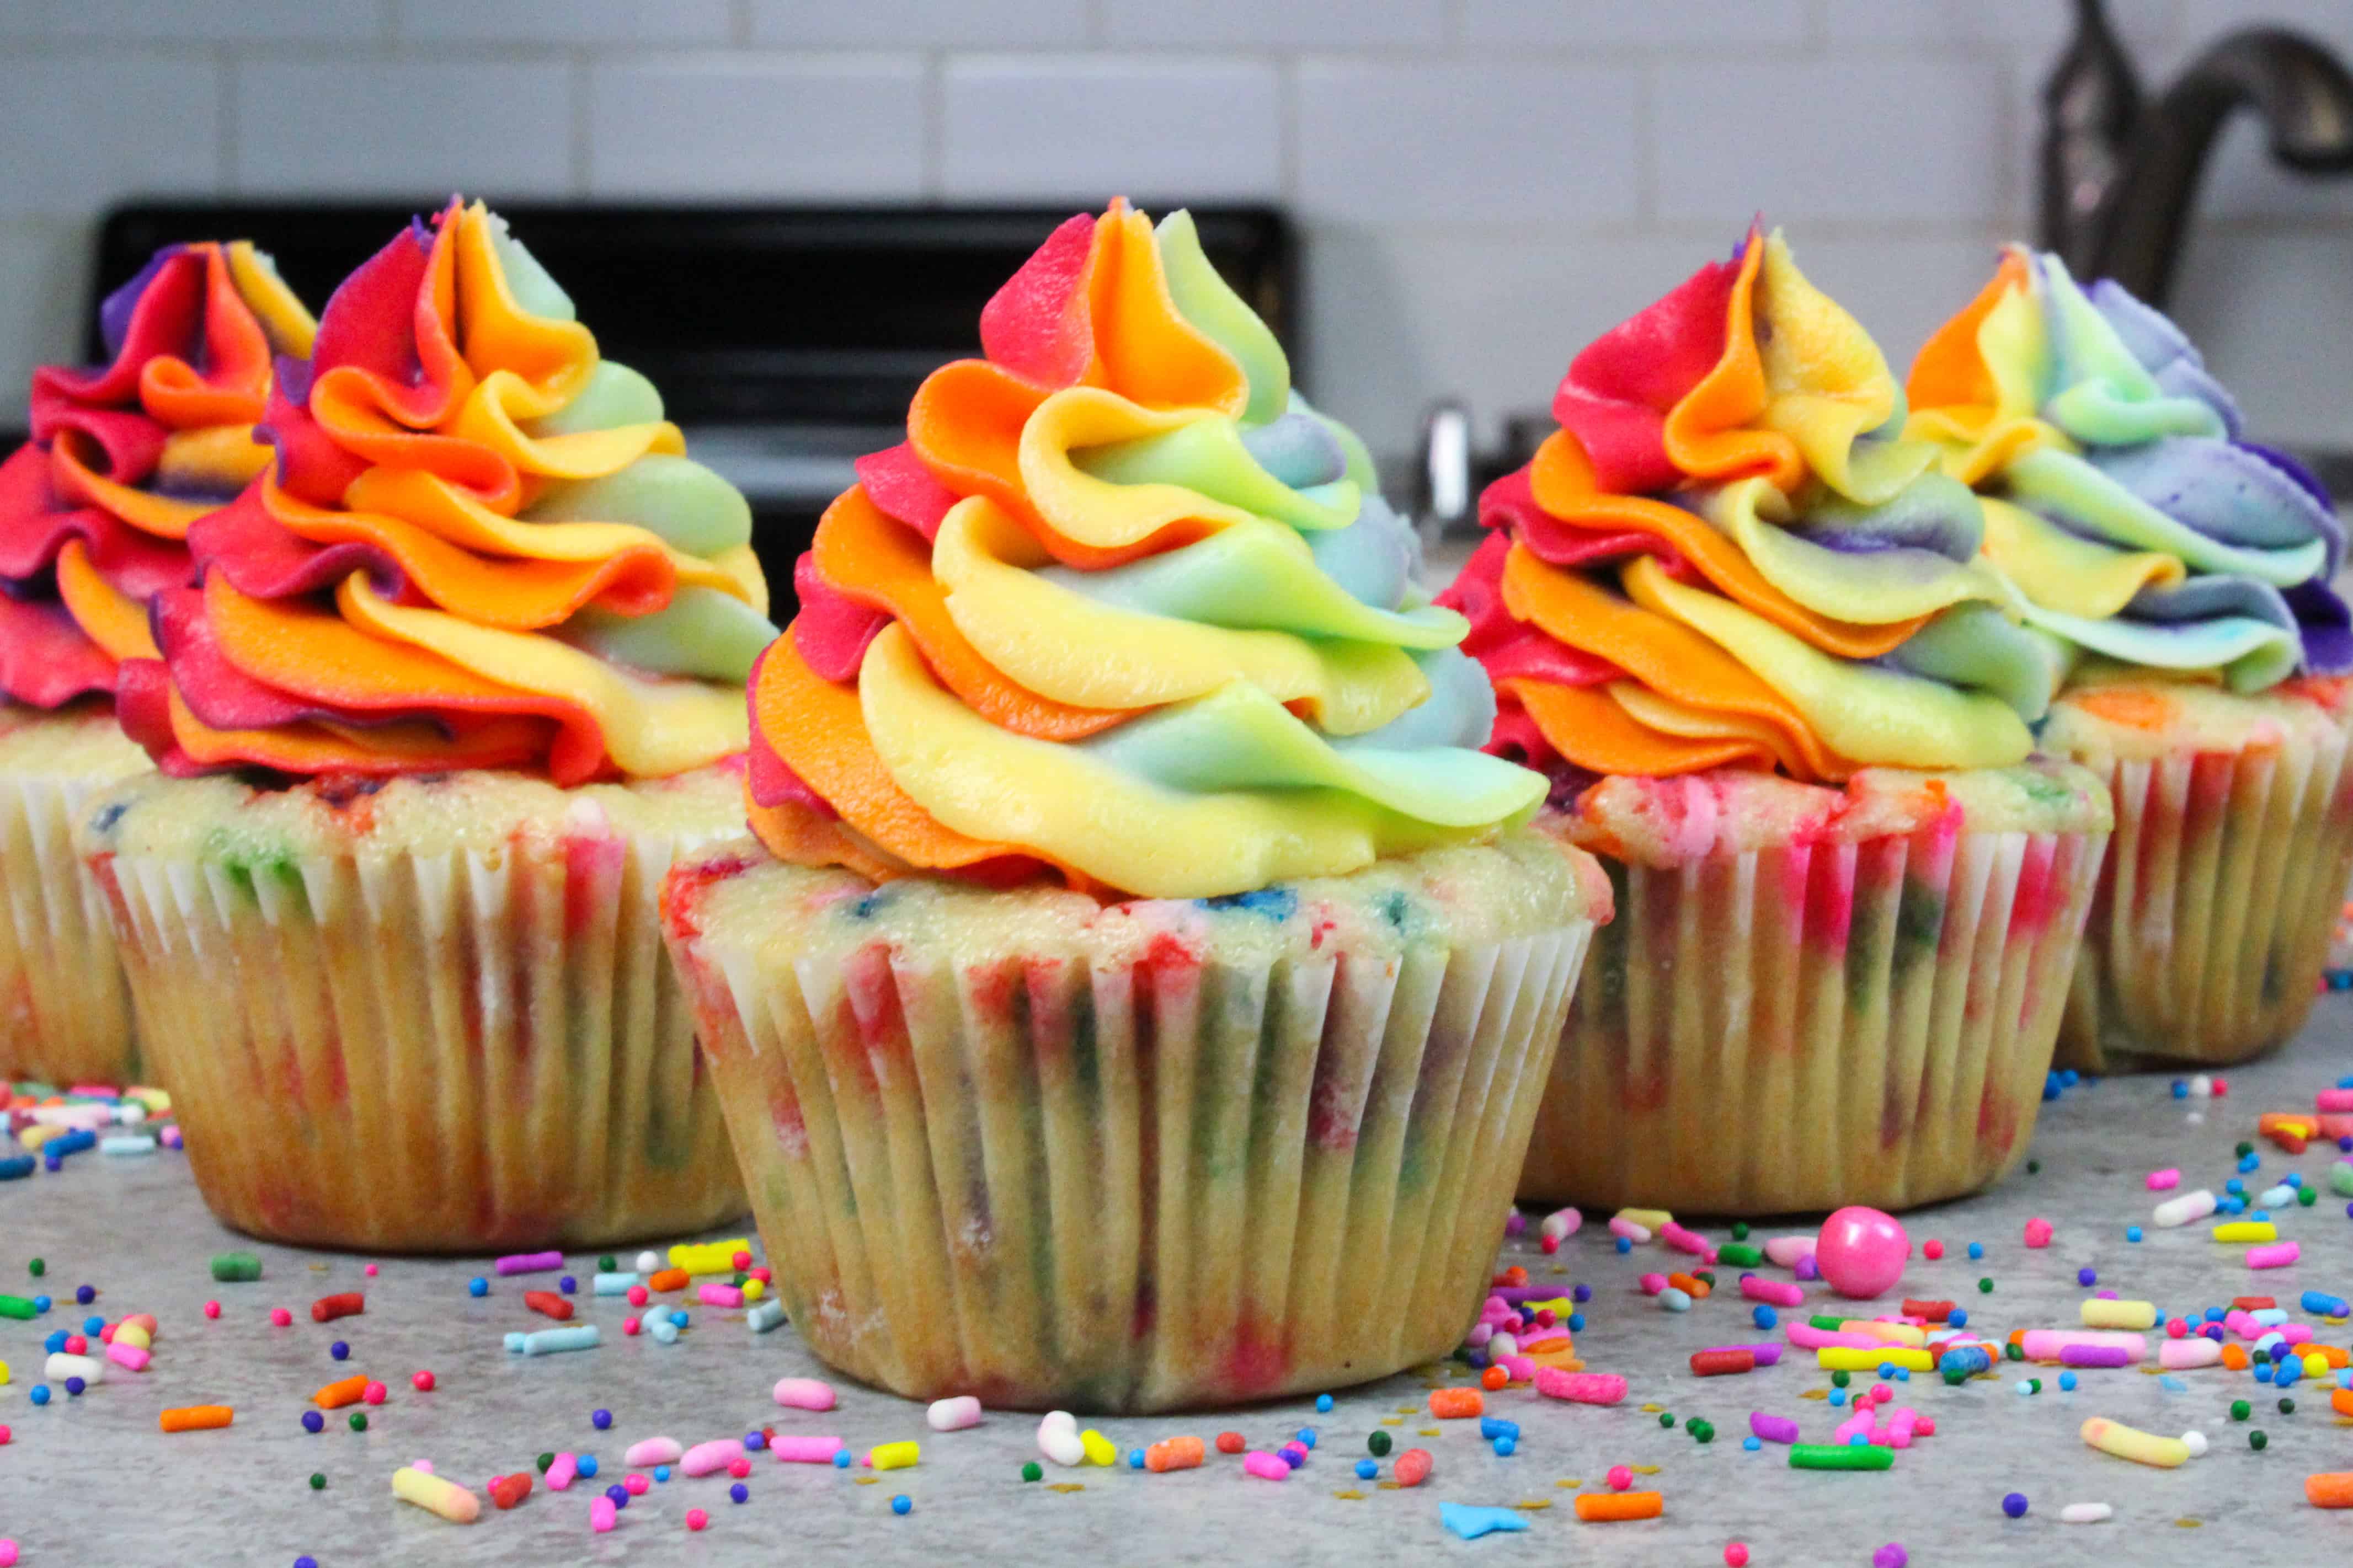 photo of funfetti cupcakes, decorated with rainbow swirled frosting